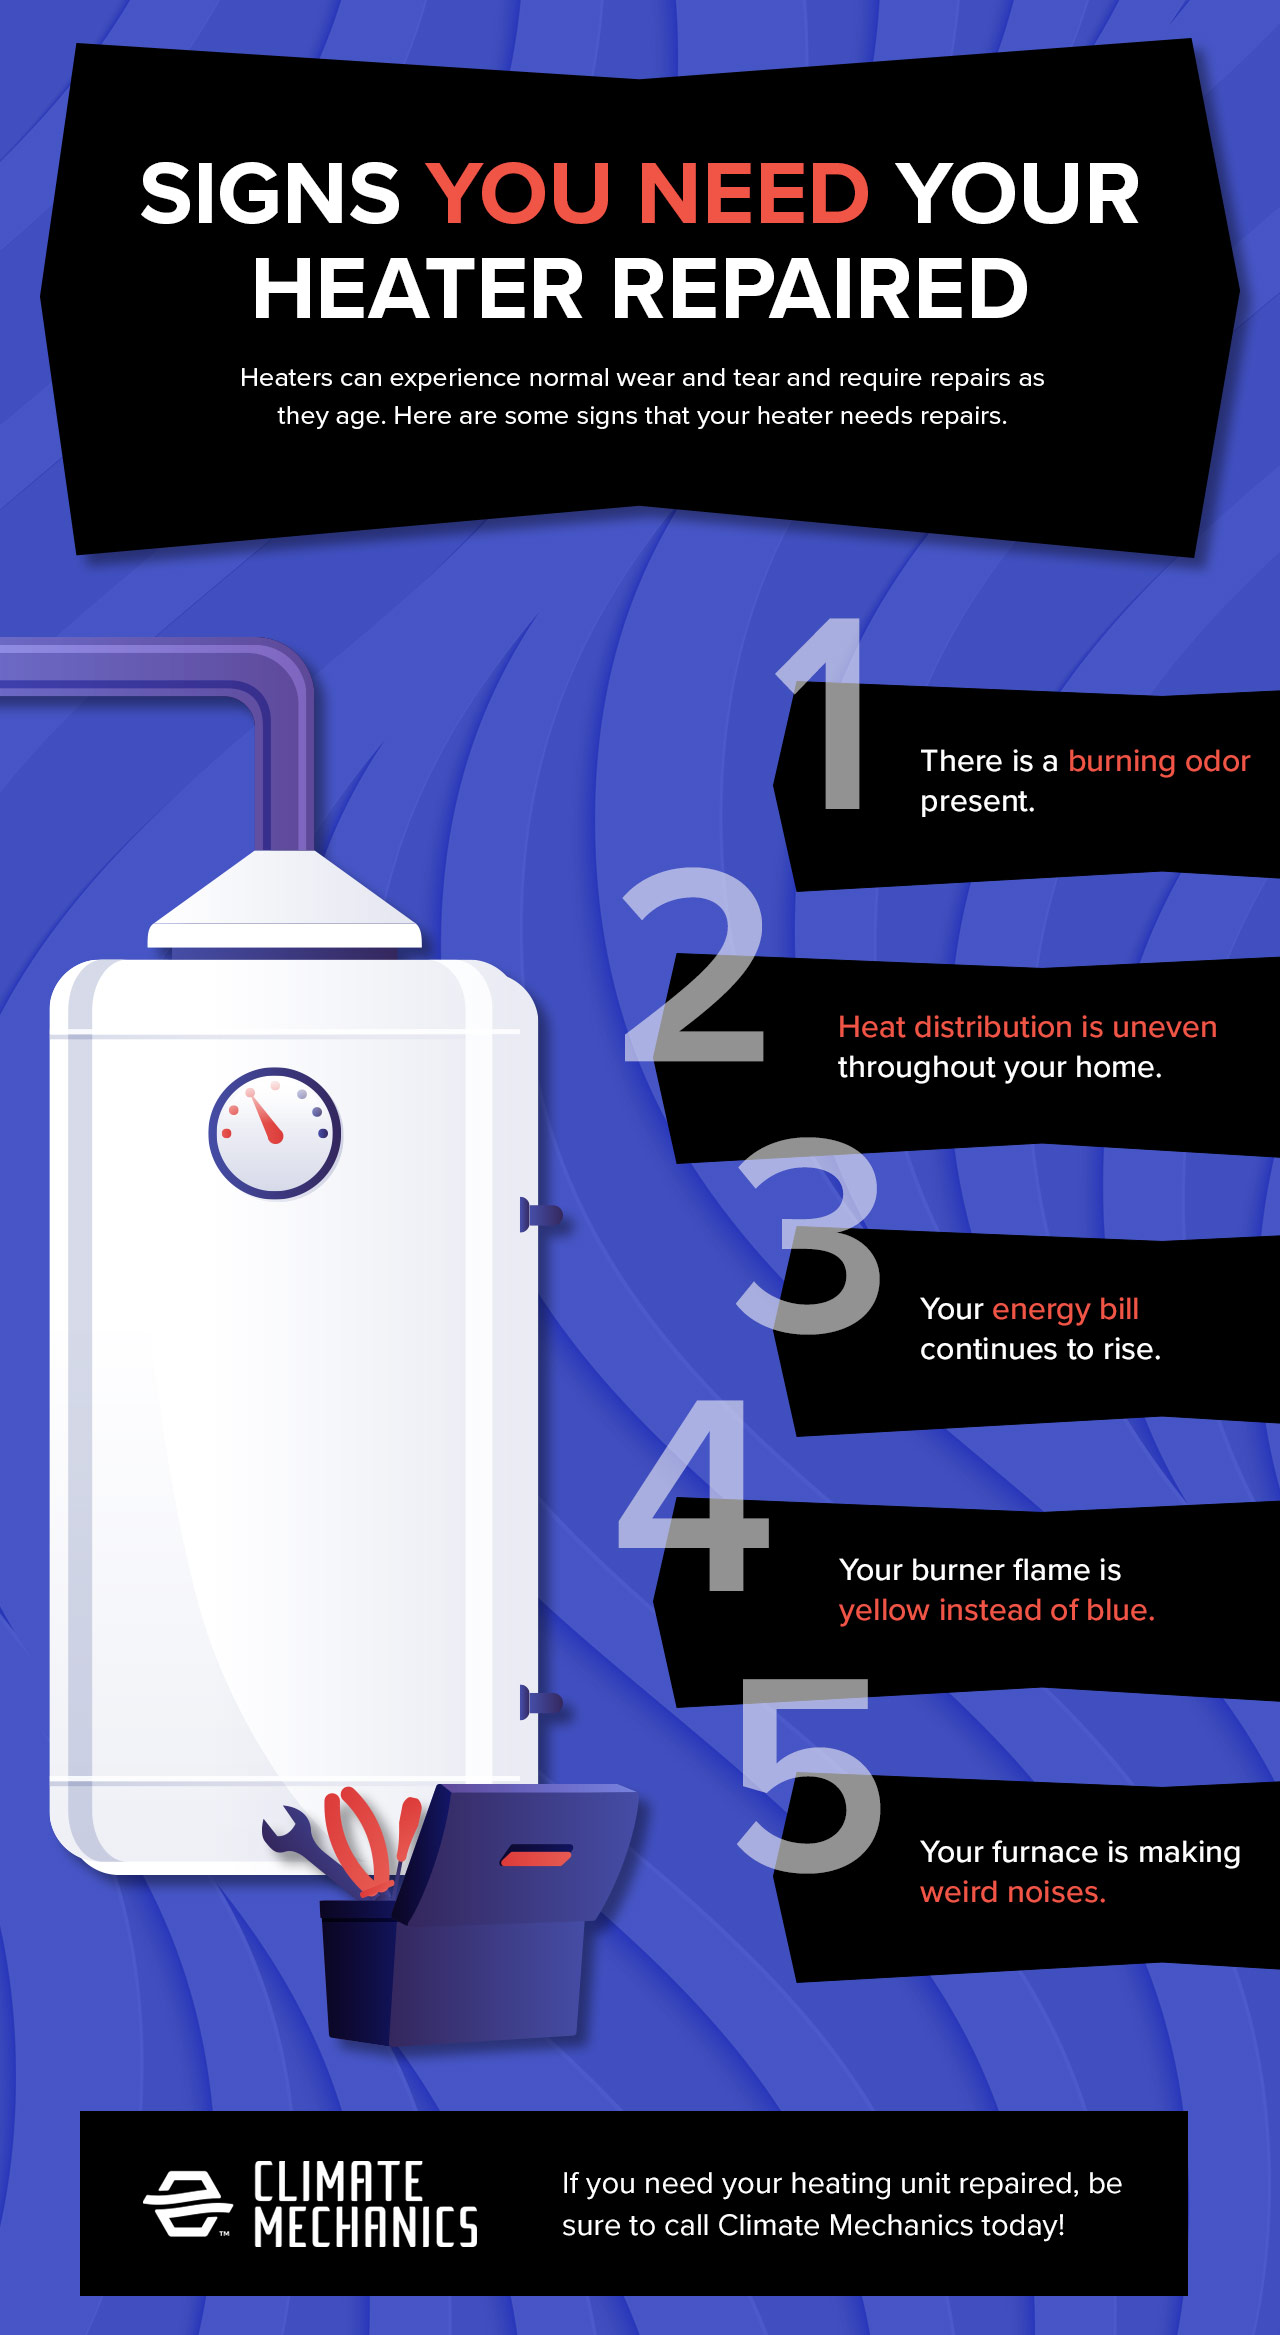 Signs You Need Your Heater Repaired Infographic